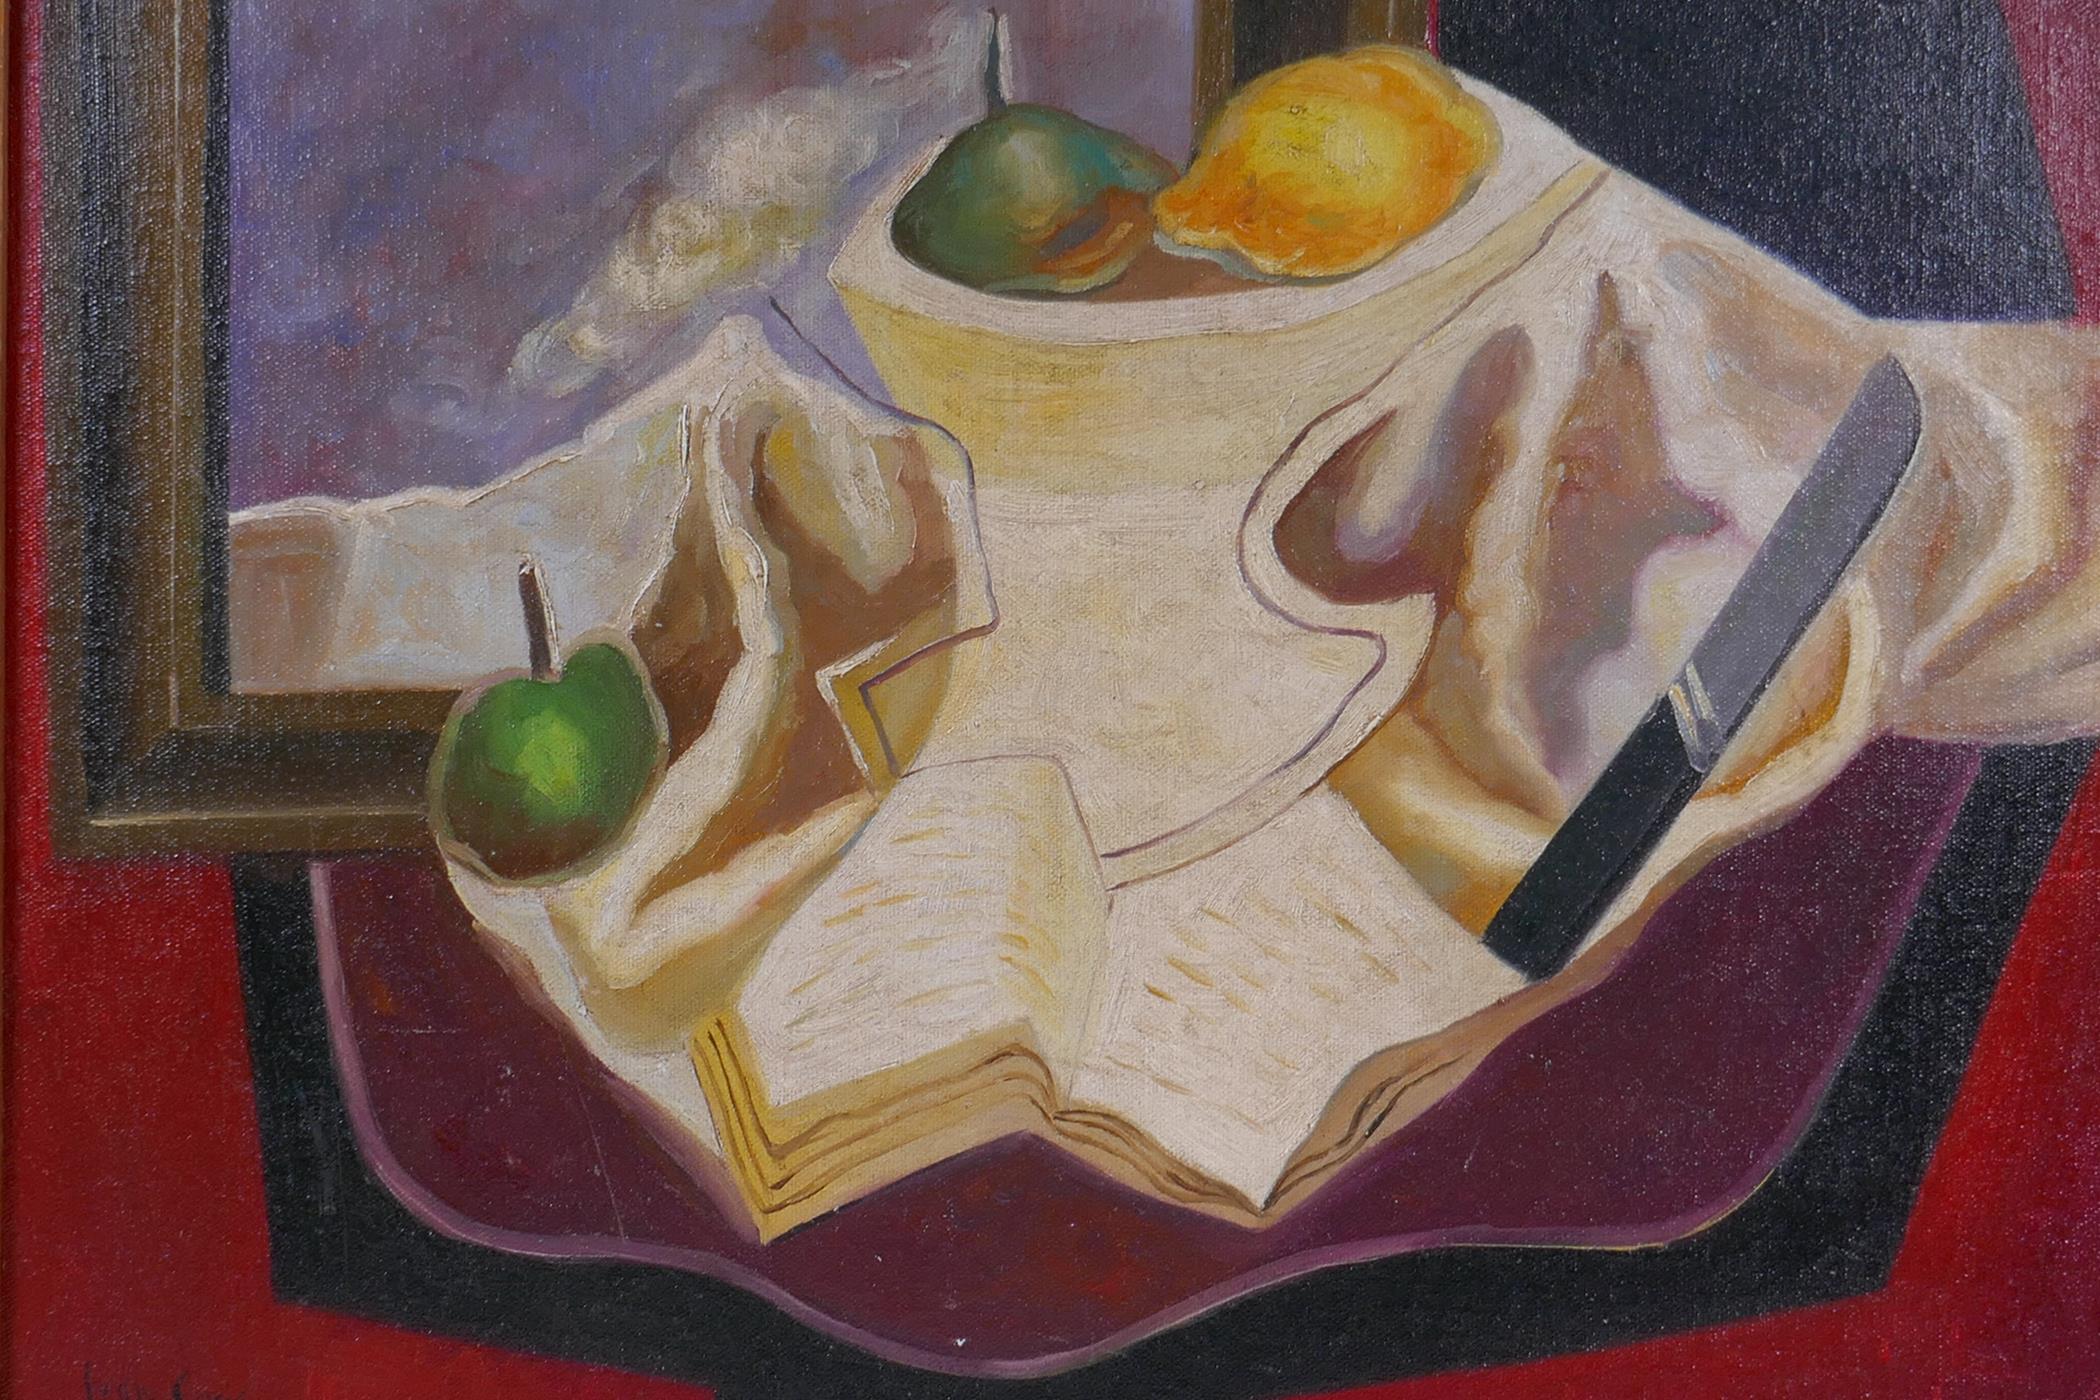 In the manner of Juan Gris, (Spanish 1887-1927), Cubist still life, oil on canvas board, 50 x 40cm